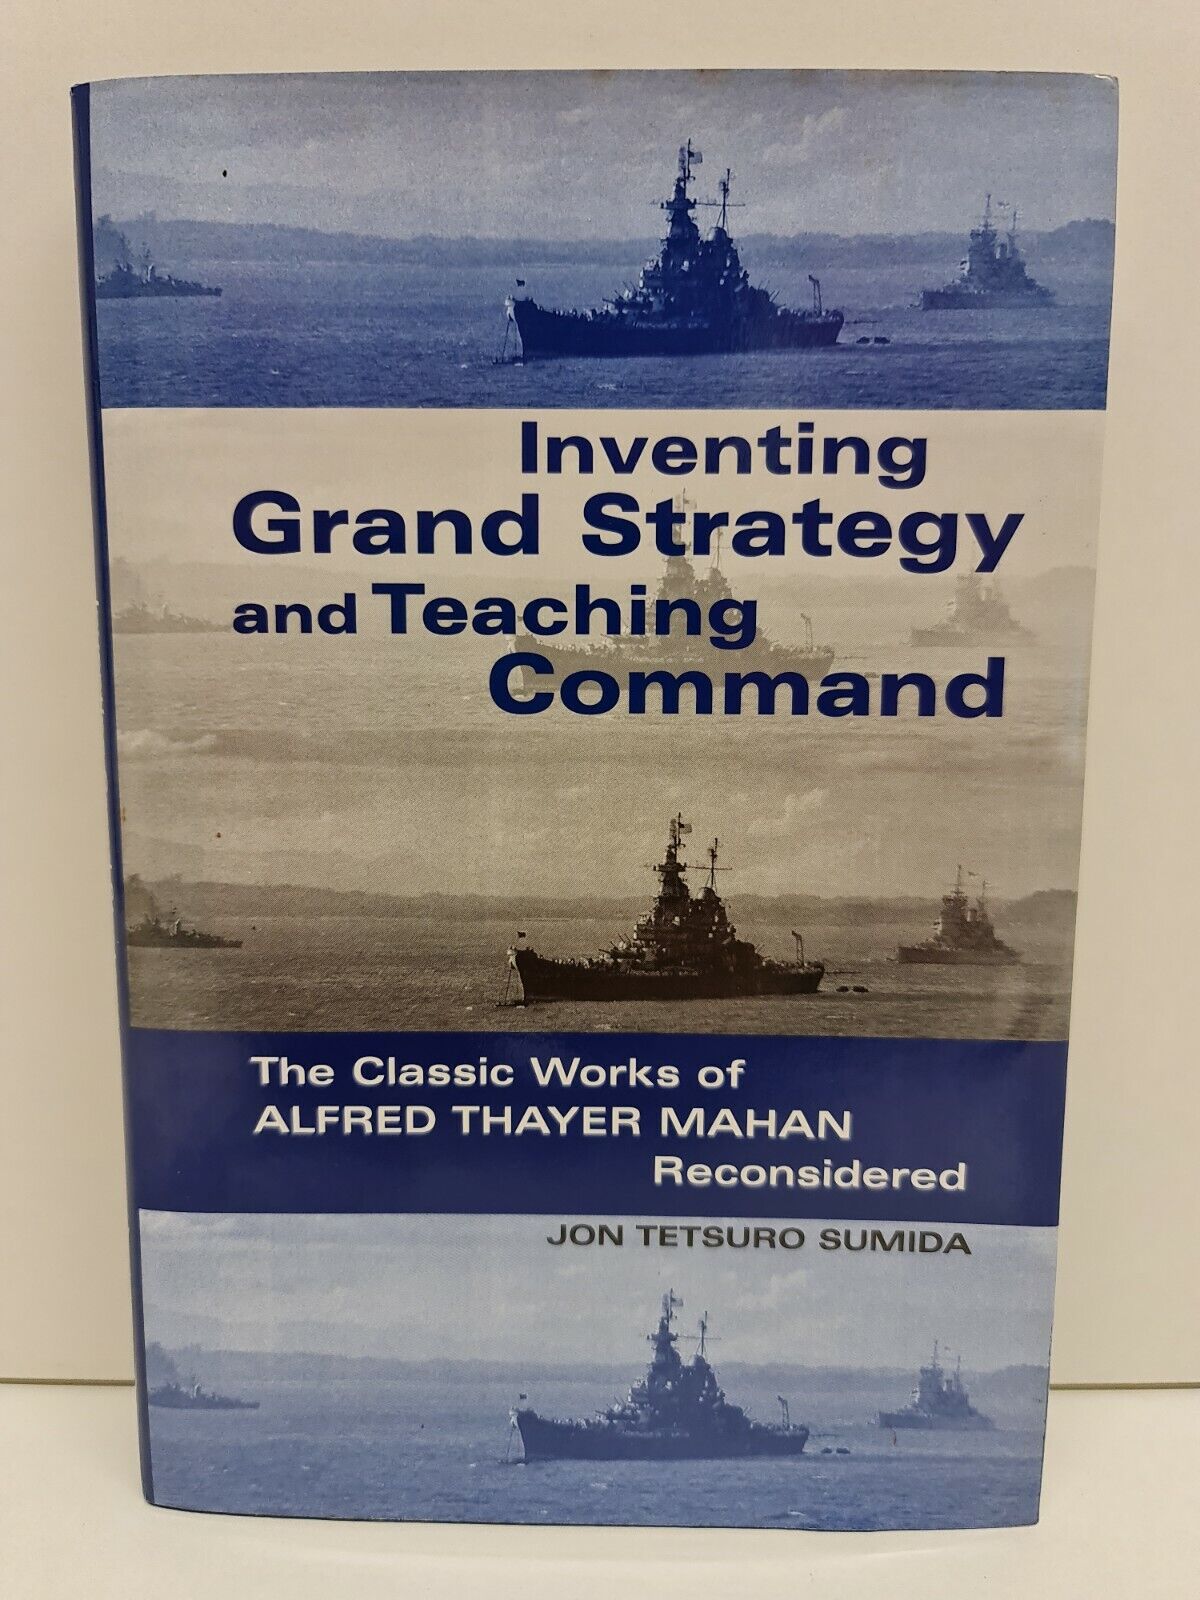 SIGNED Inventing Grand Strategy and Teaching Command by Jon Sumida (1997)